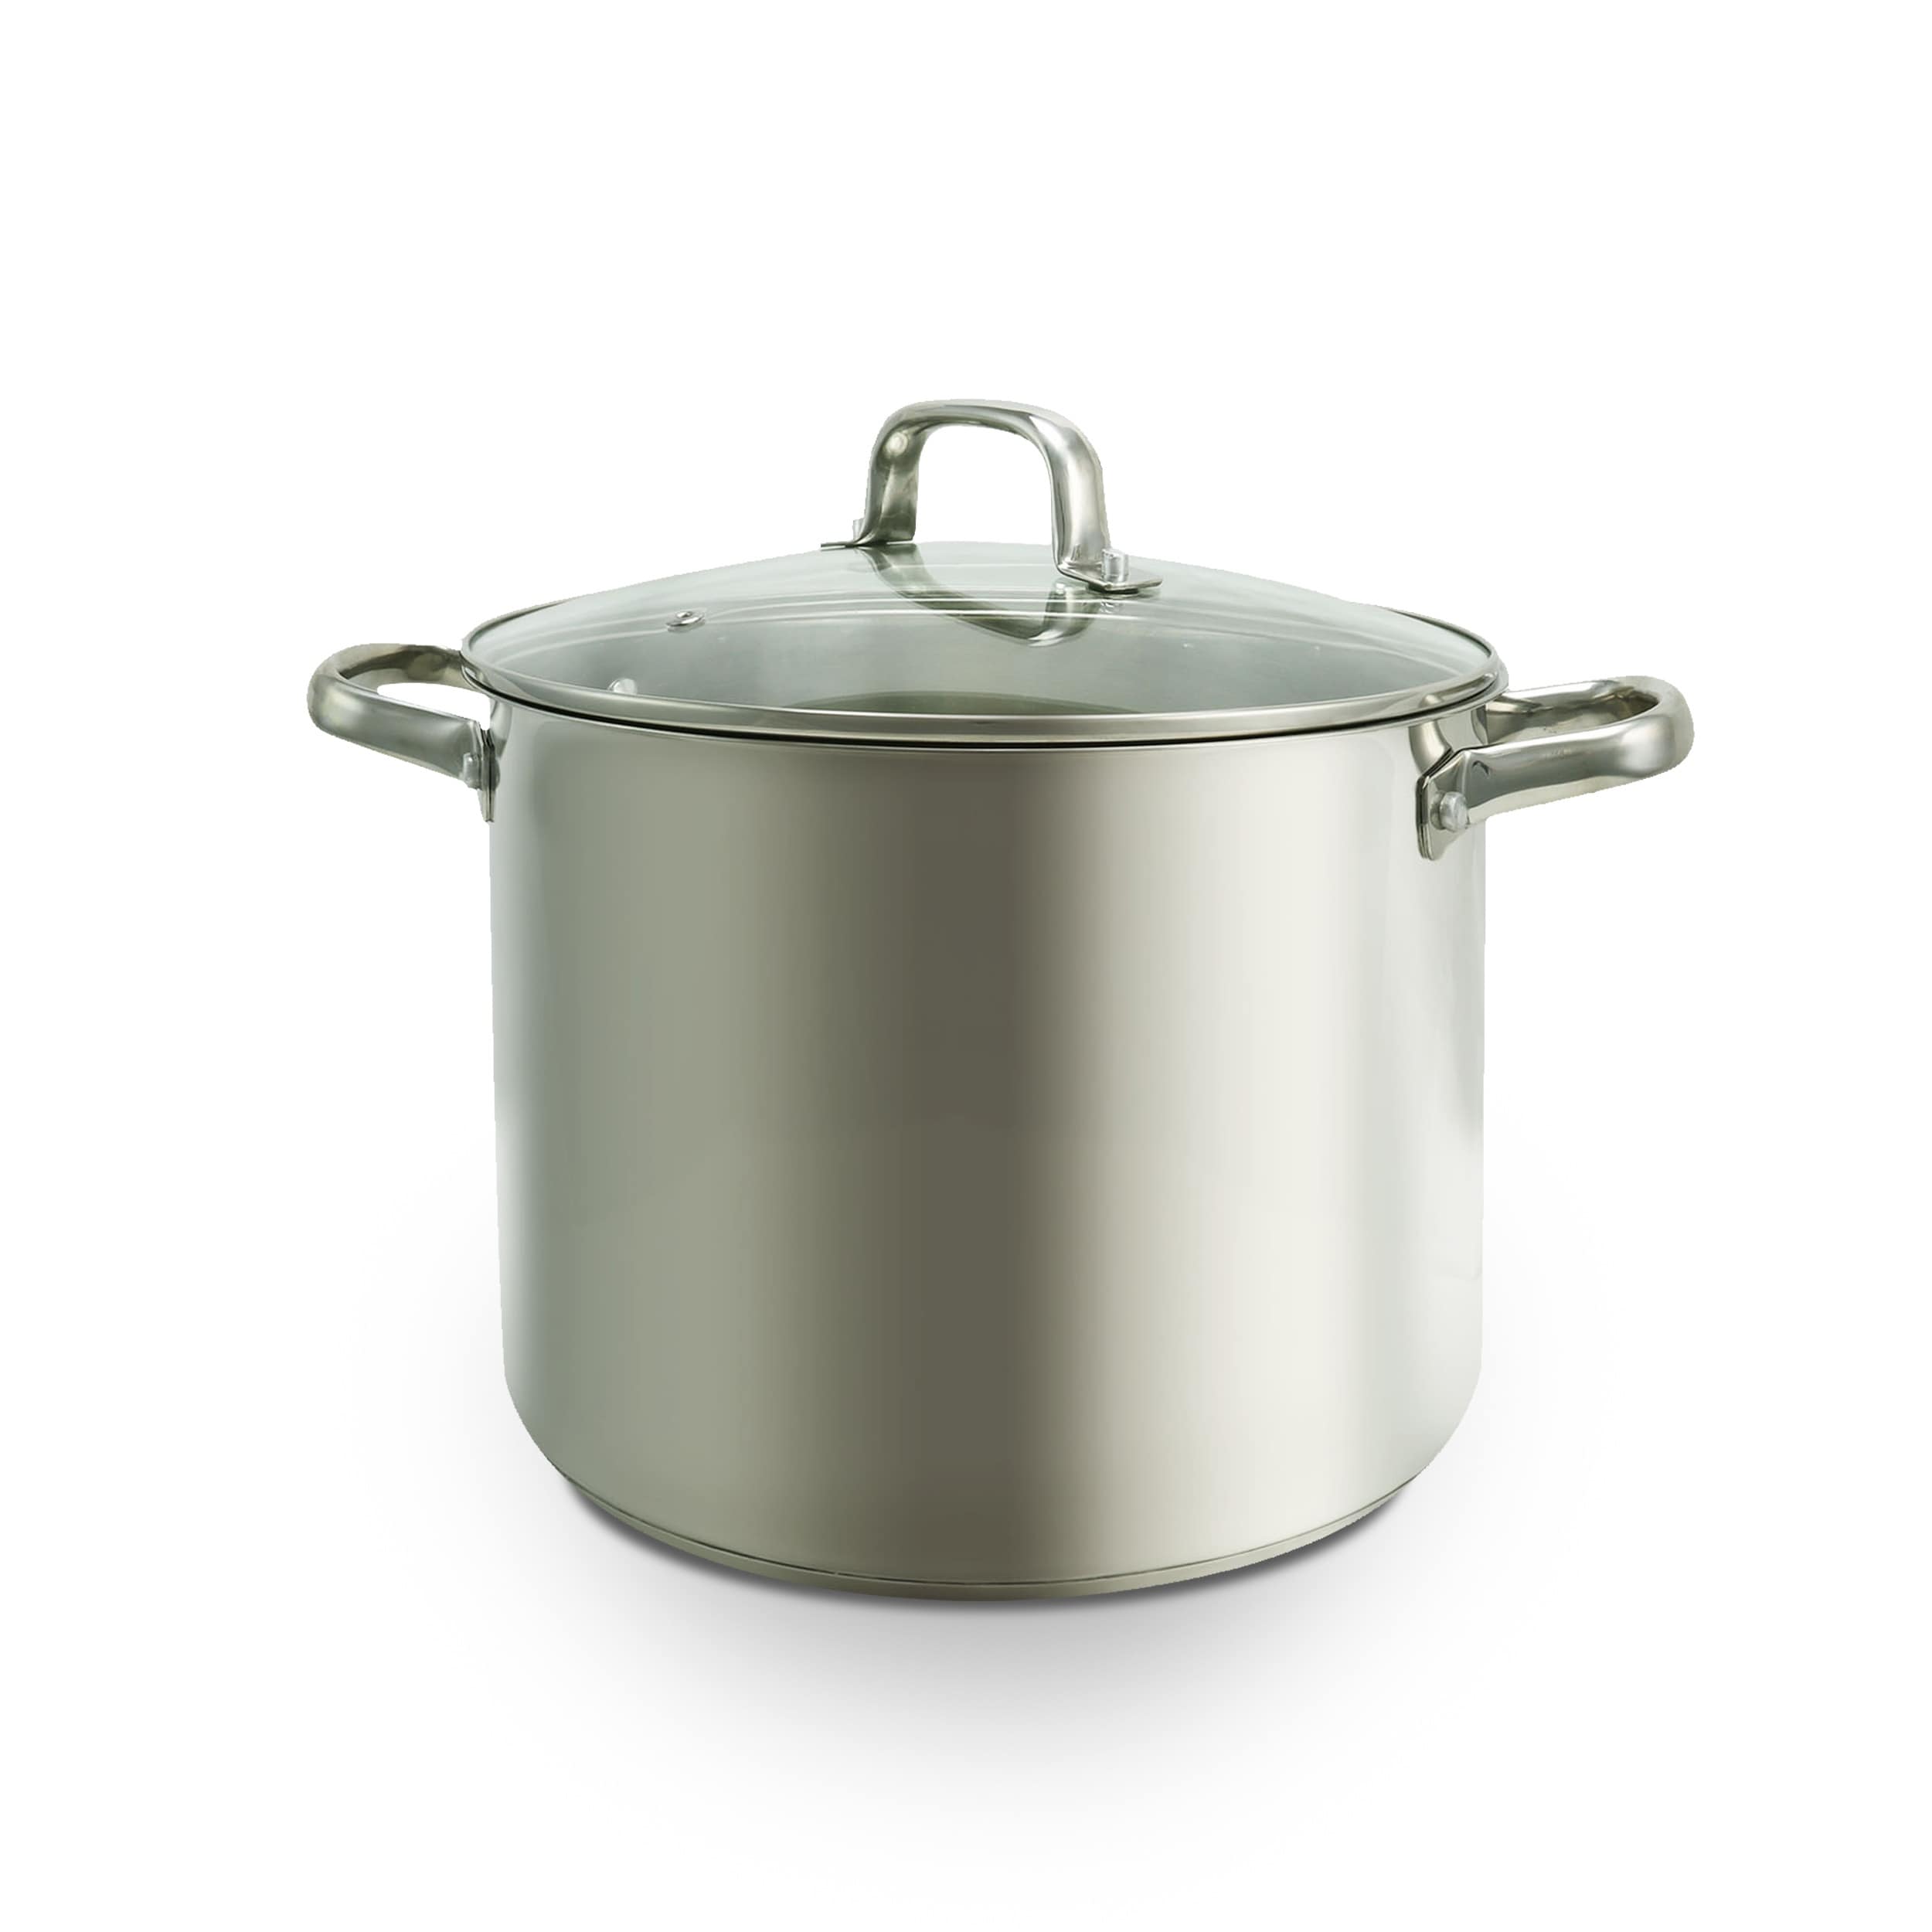 Rachael Ray Cook + Create 12qt Enamel On Steel Stockpot With Lid